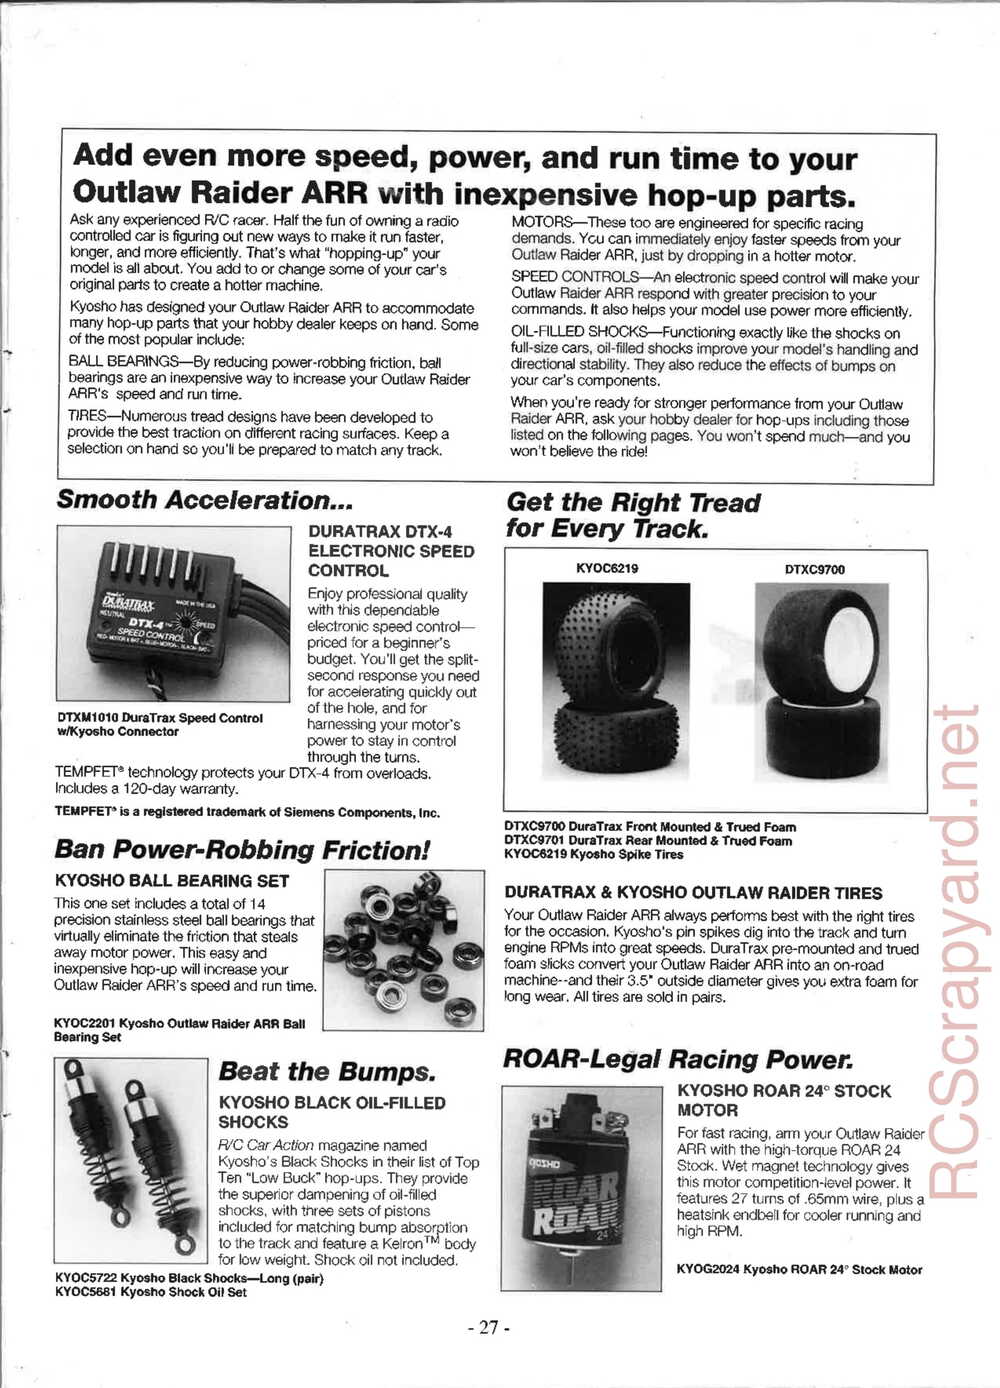 Kyosho - 3162H - Outlaw-Raider ARR - Manual - Page 27